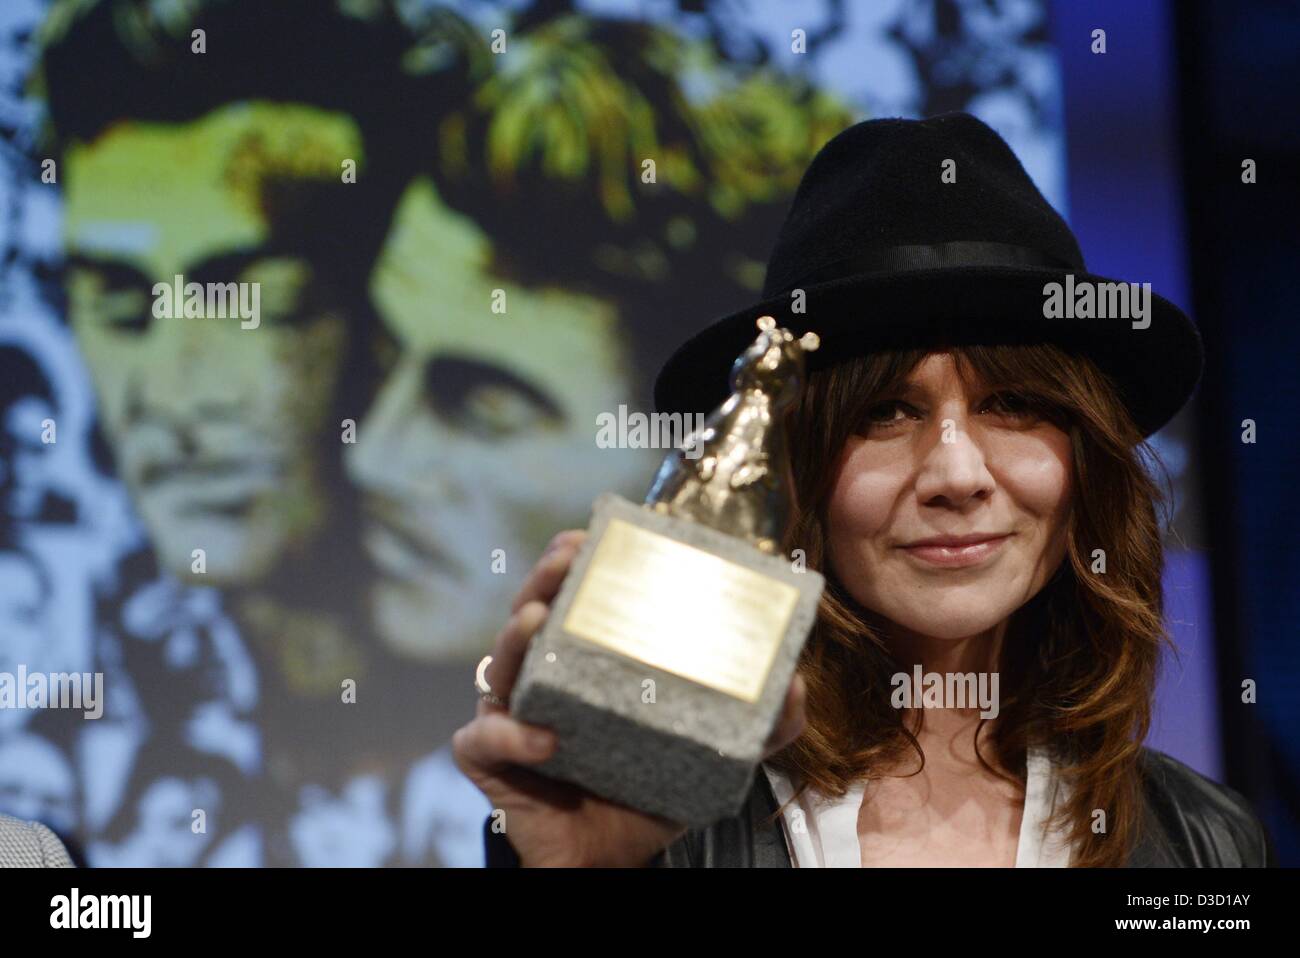 Polish director Malgoska Szumowska shows her Teddy Award for her film 'In the name of' (W imie) at Teddy ceremony as part of the 63rd annual Berlin International Film Festival aka Berlinale, in Berlin, Germany, 15 February 2013. The 27th Teddy Award is on of the most prestigious queer film prizes. As a symbol of political engagement, the award is presented in recognition of films and individuals involved in communicating queer issues to a wide audience. Photo: Jens Kalaene/dpa Stock Photo